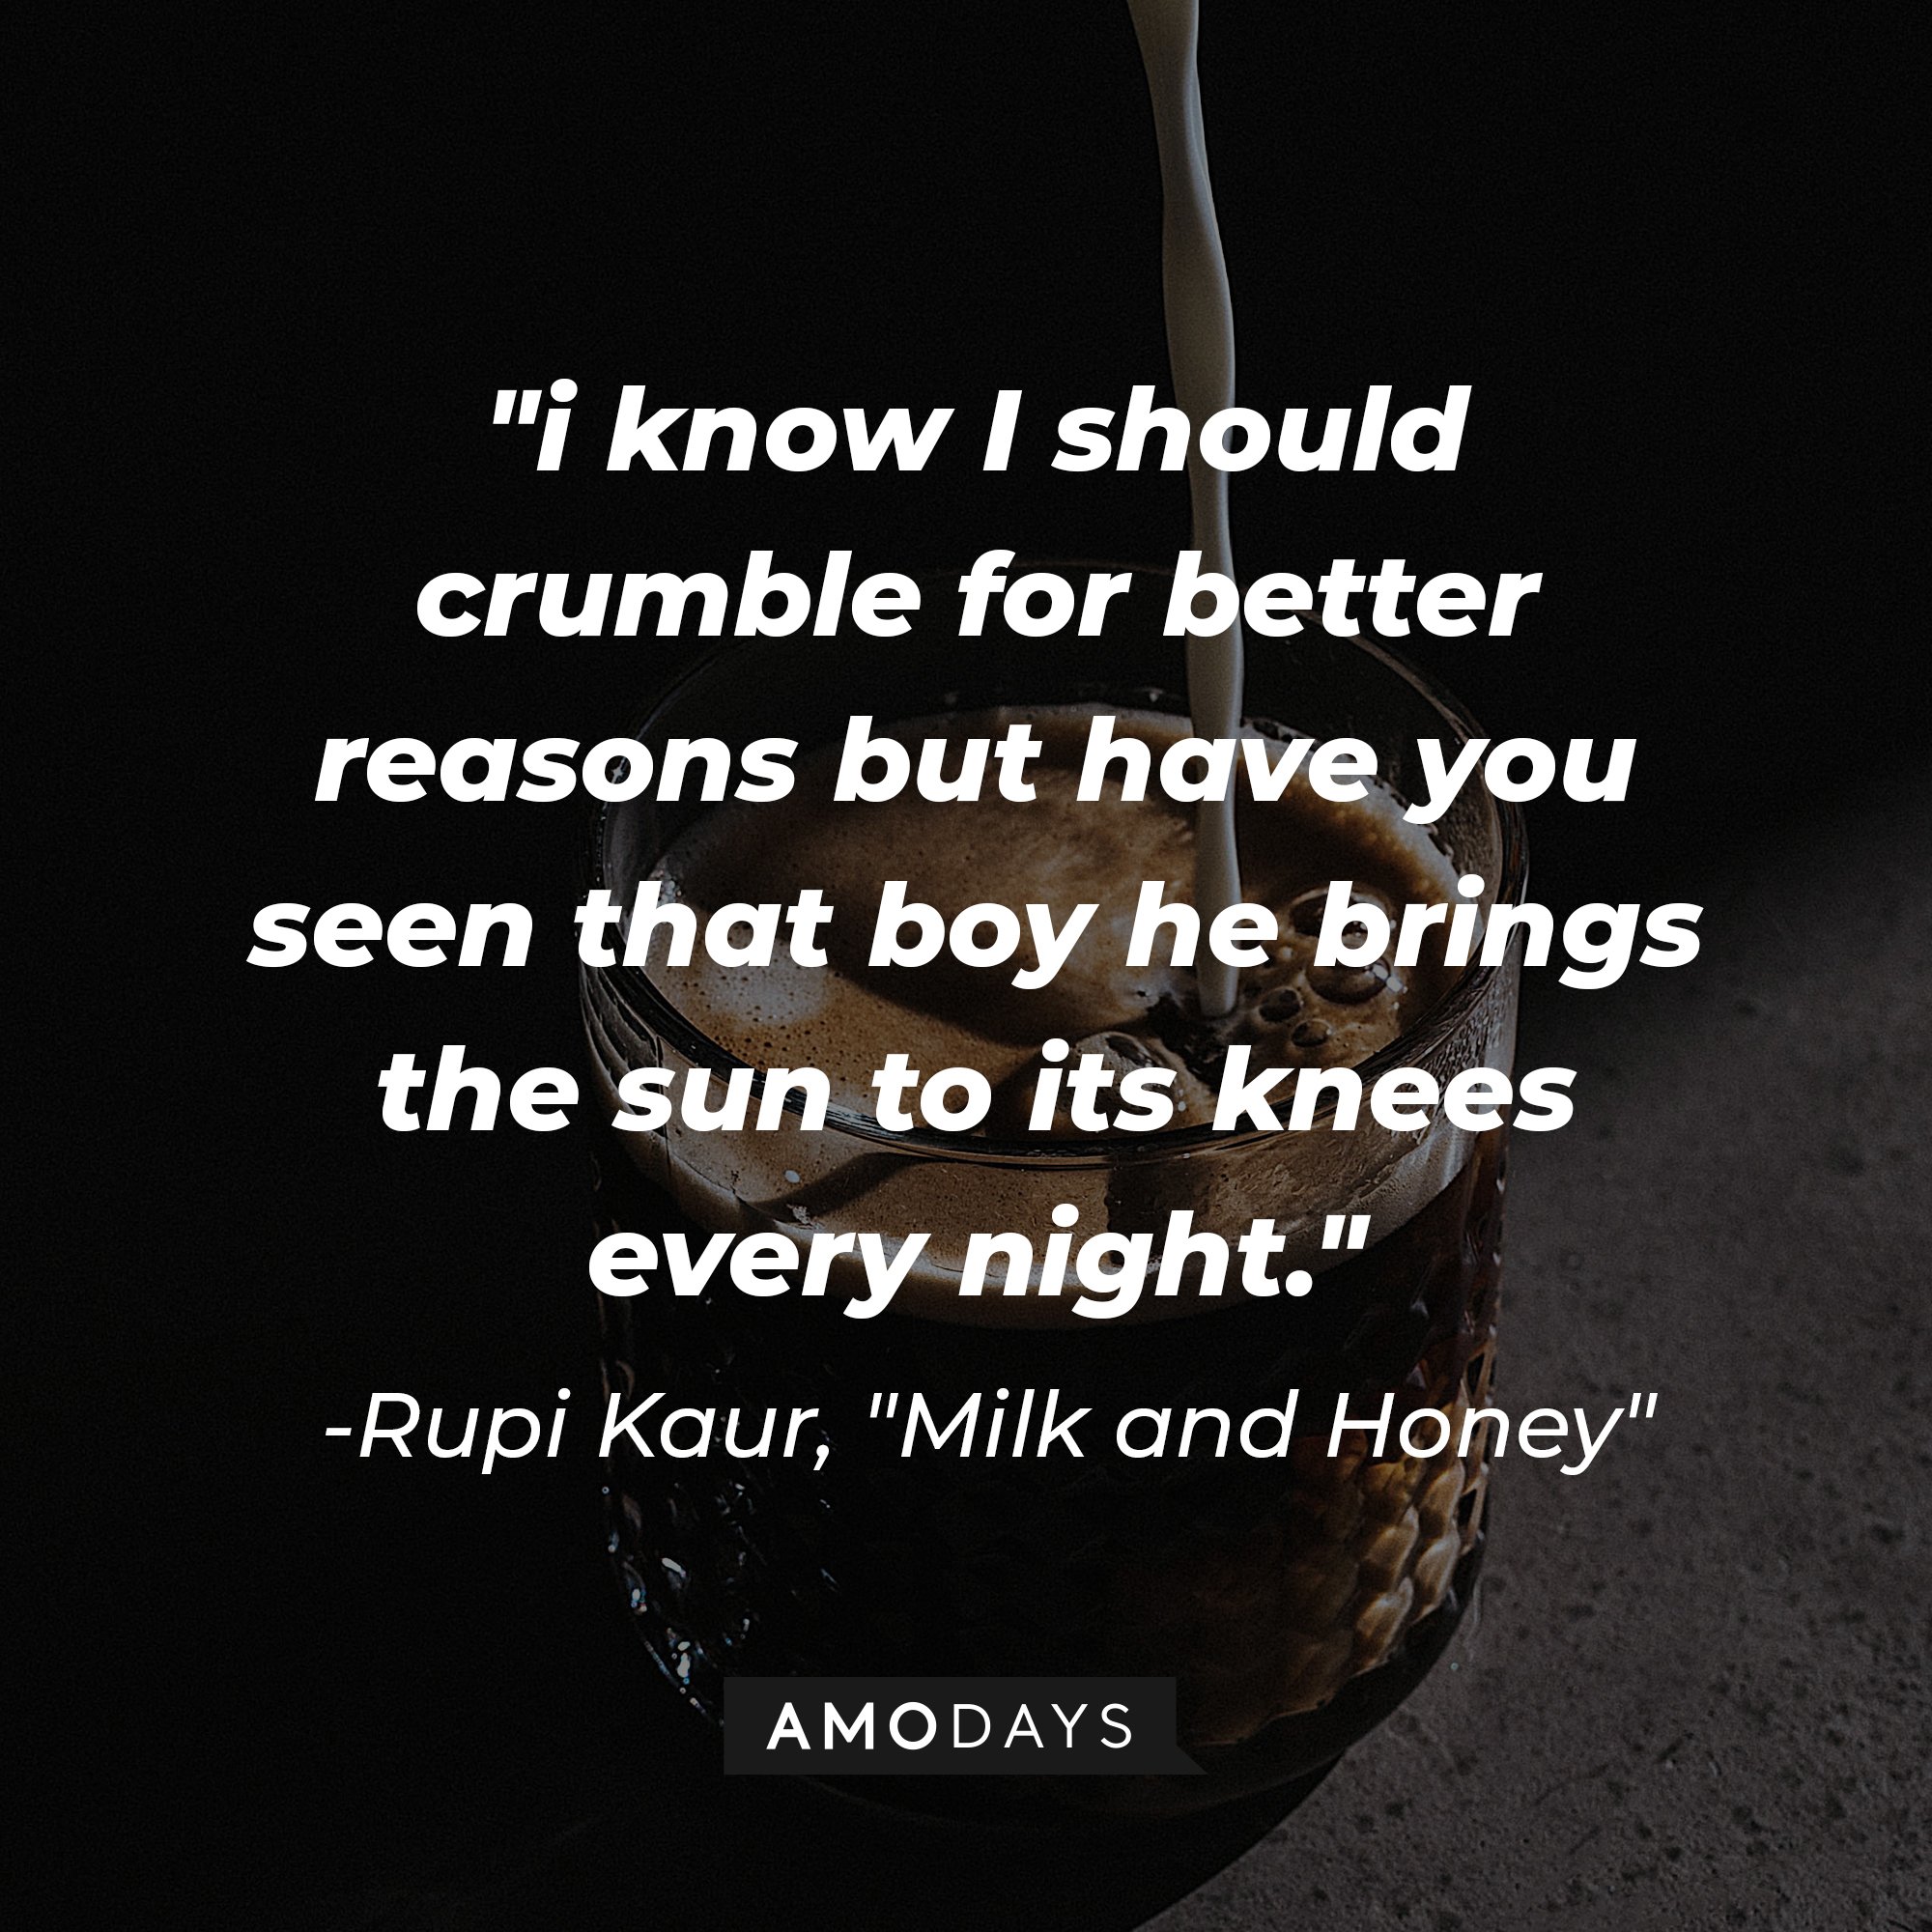 Rupi Kaur's "Milk and Honey" quote: "i know I should crumble for better reasons but have you seen that boy he brings the sun to its knees every night" | Image: AmoDays